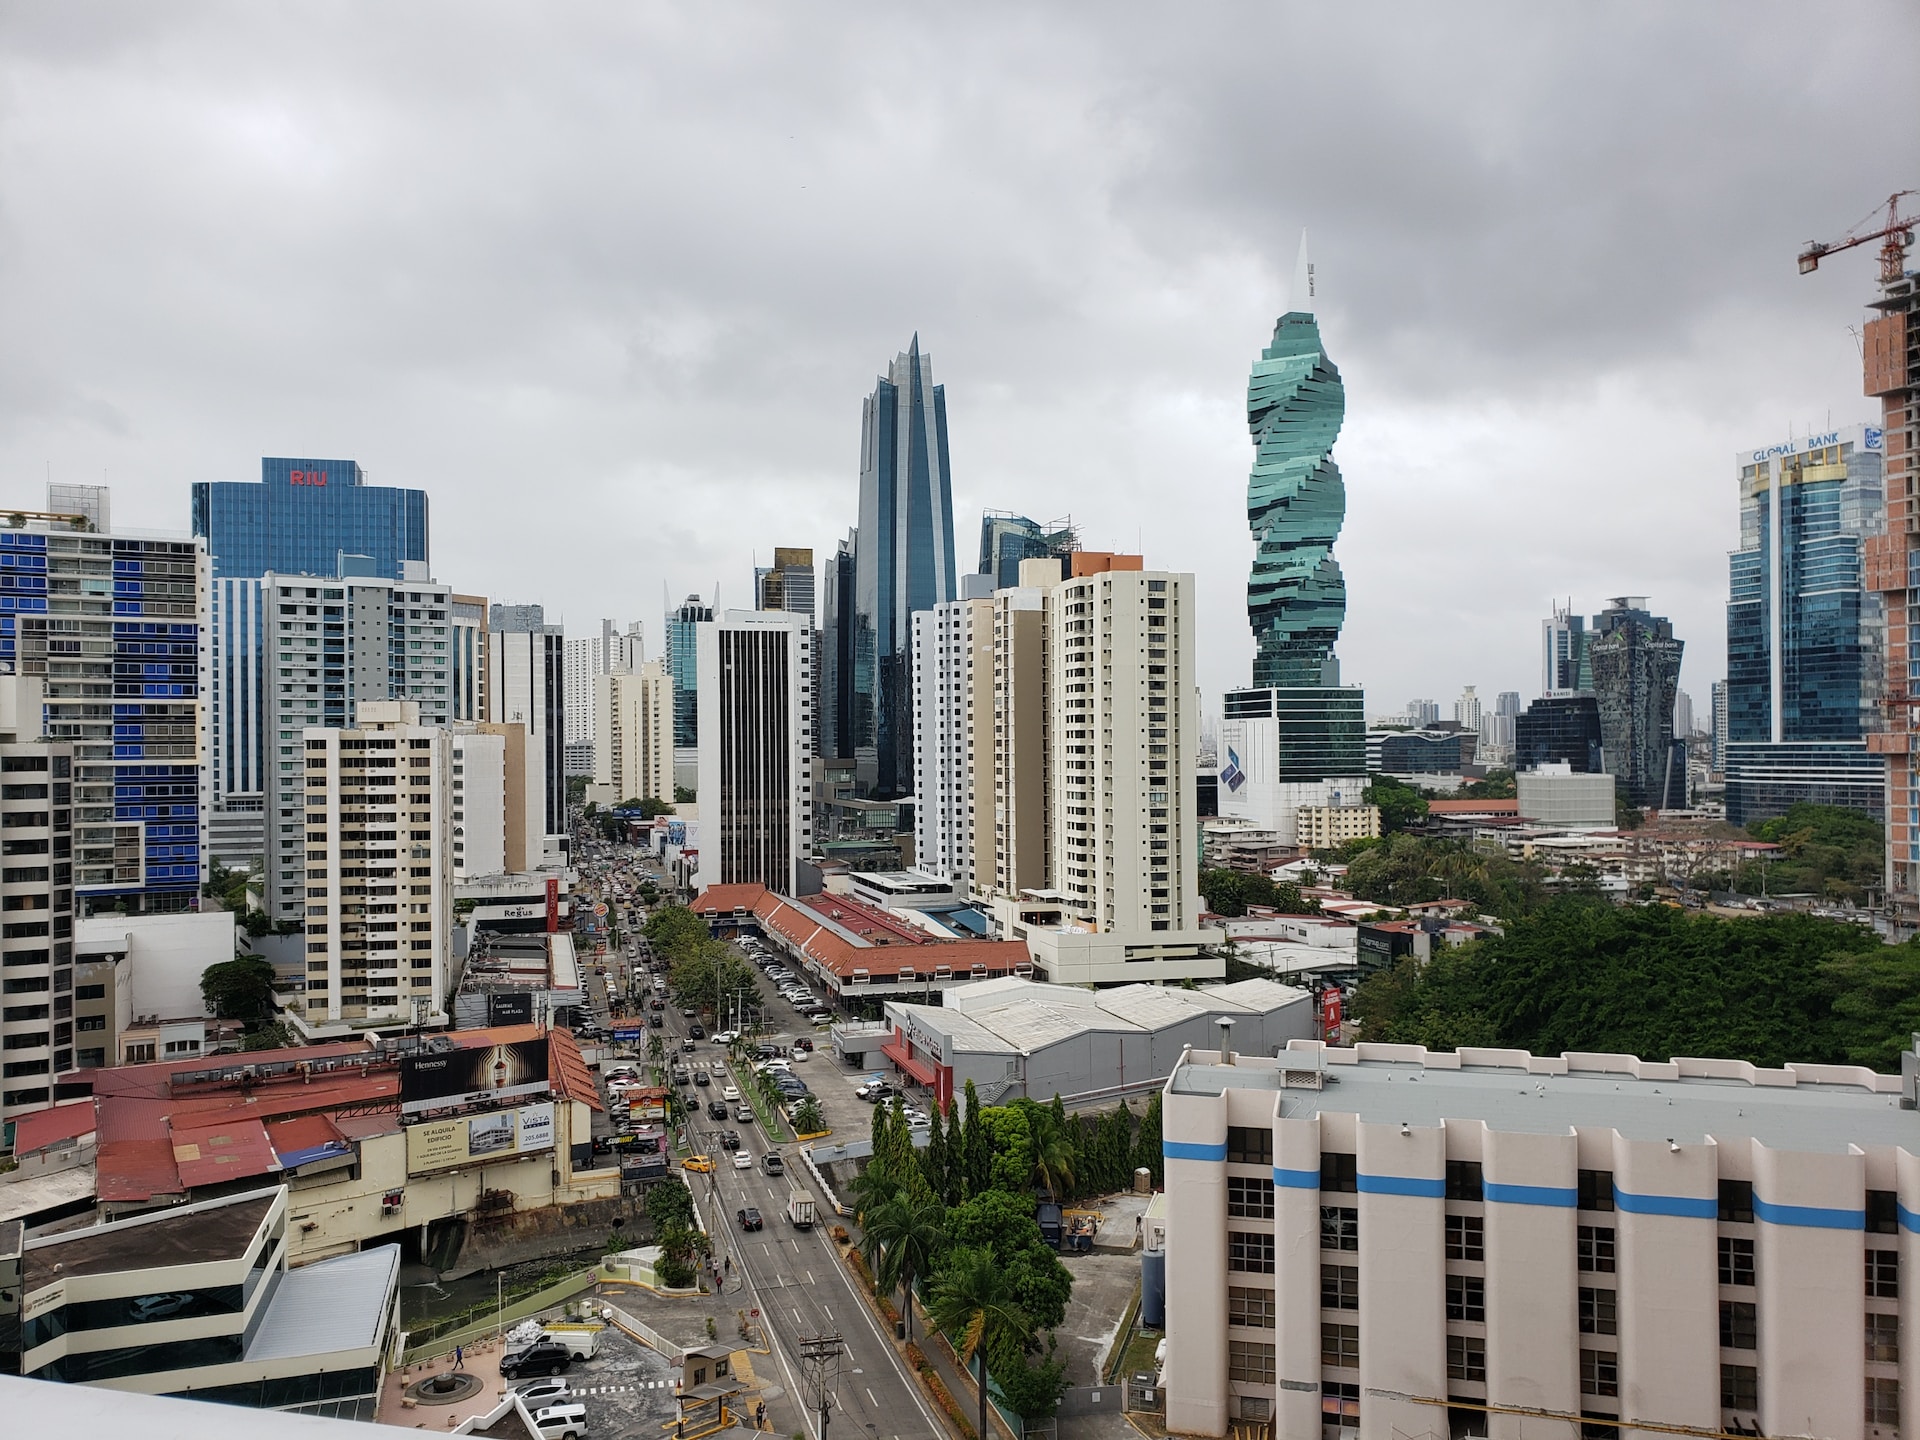 Invest in real estate projects in Panama